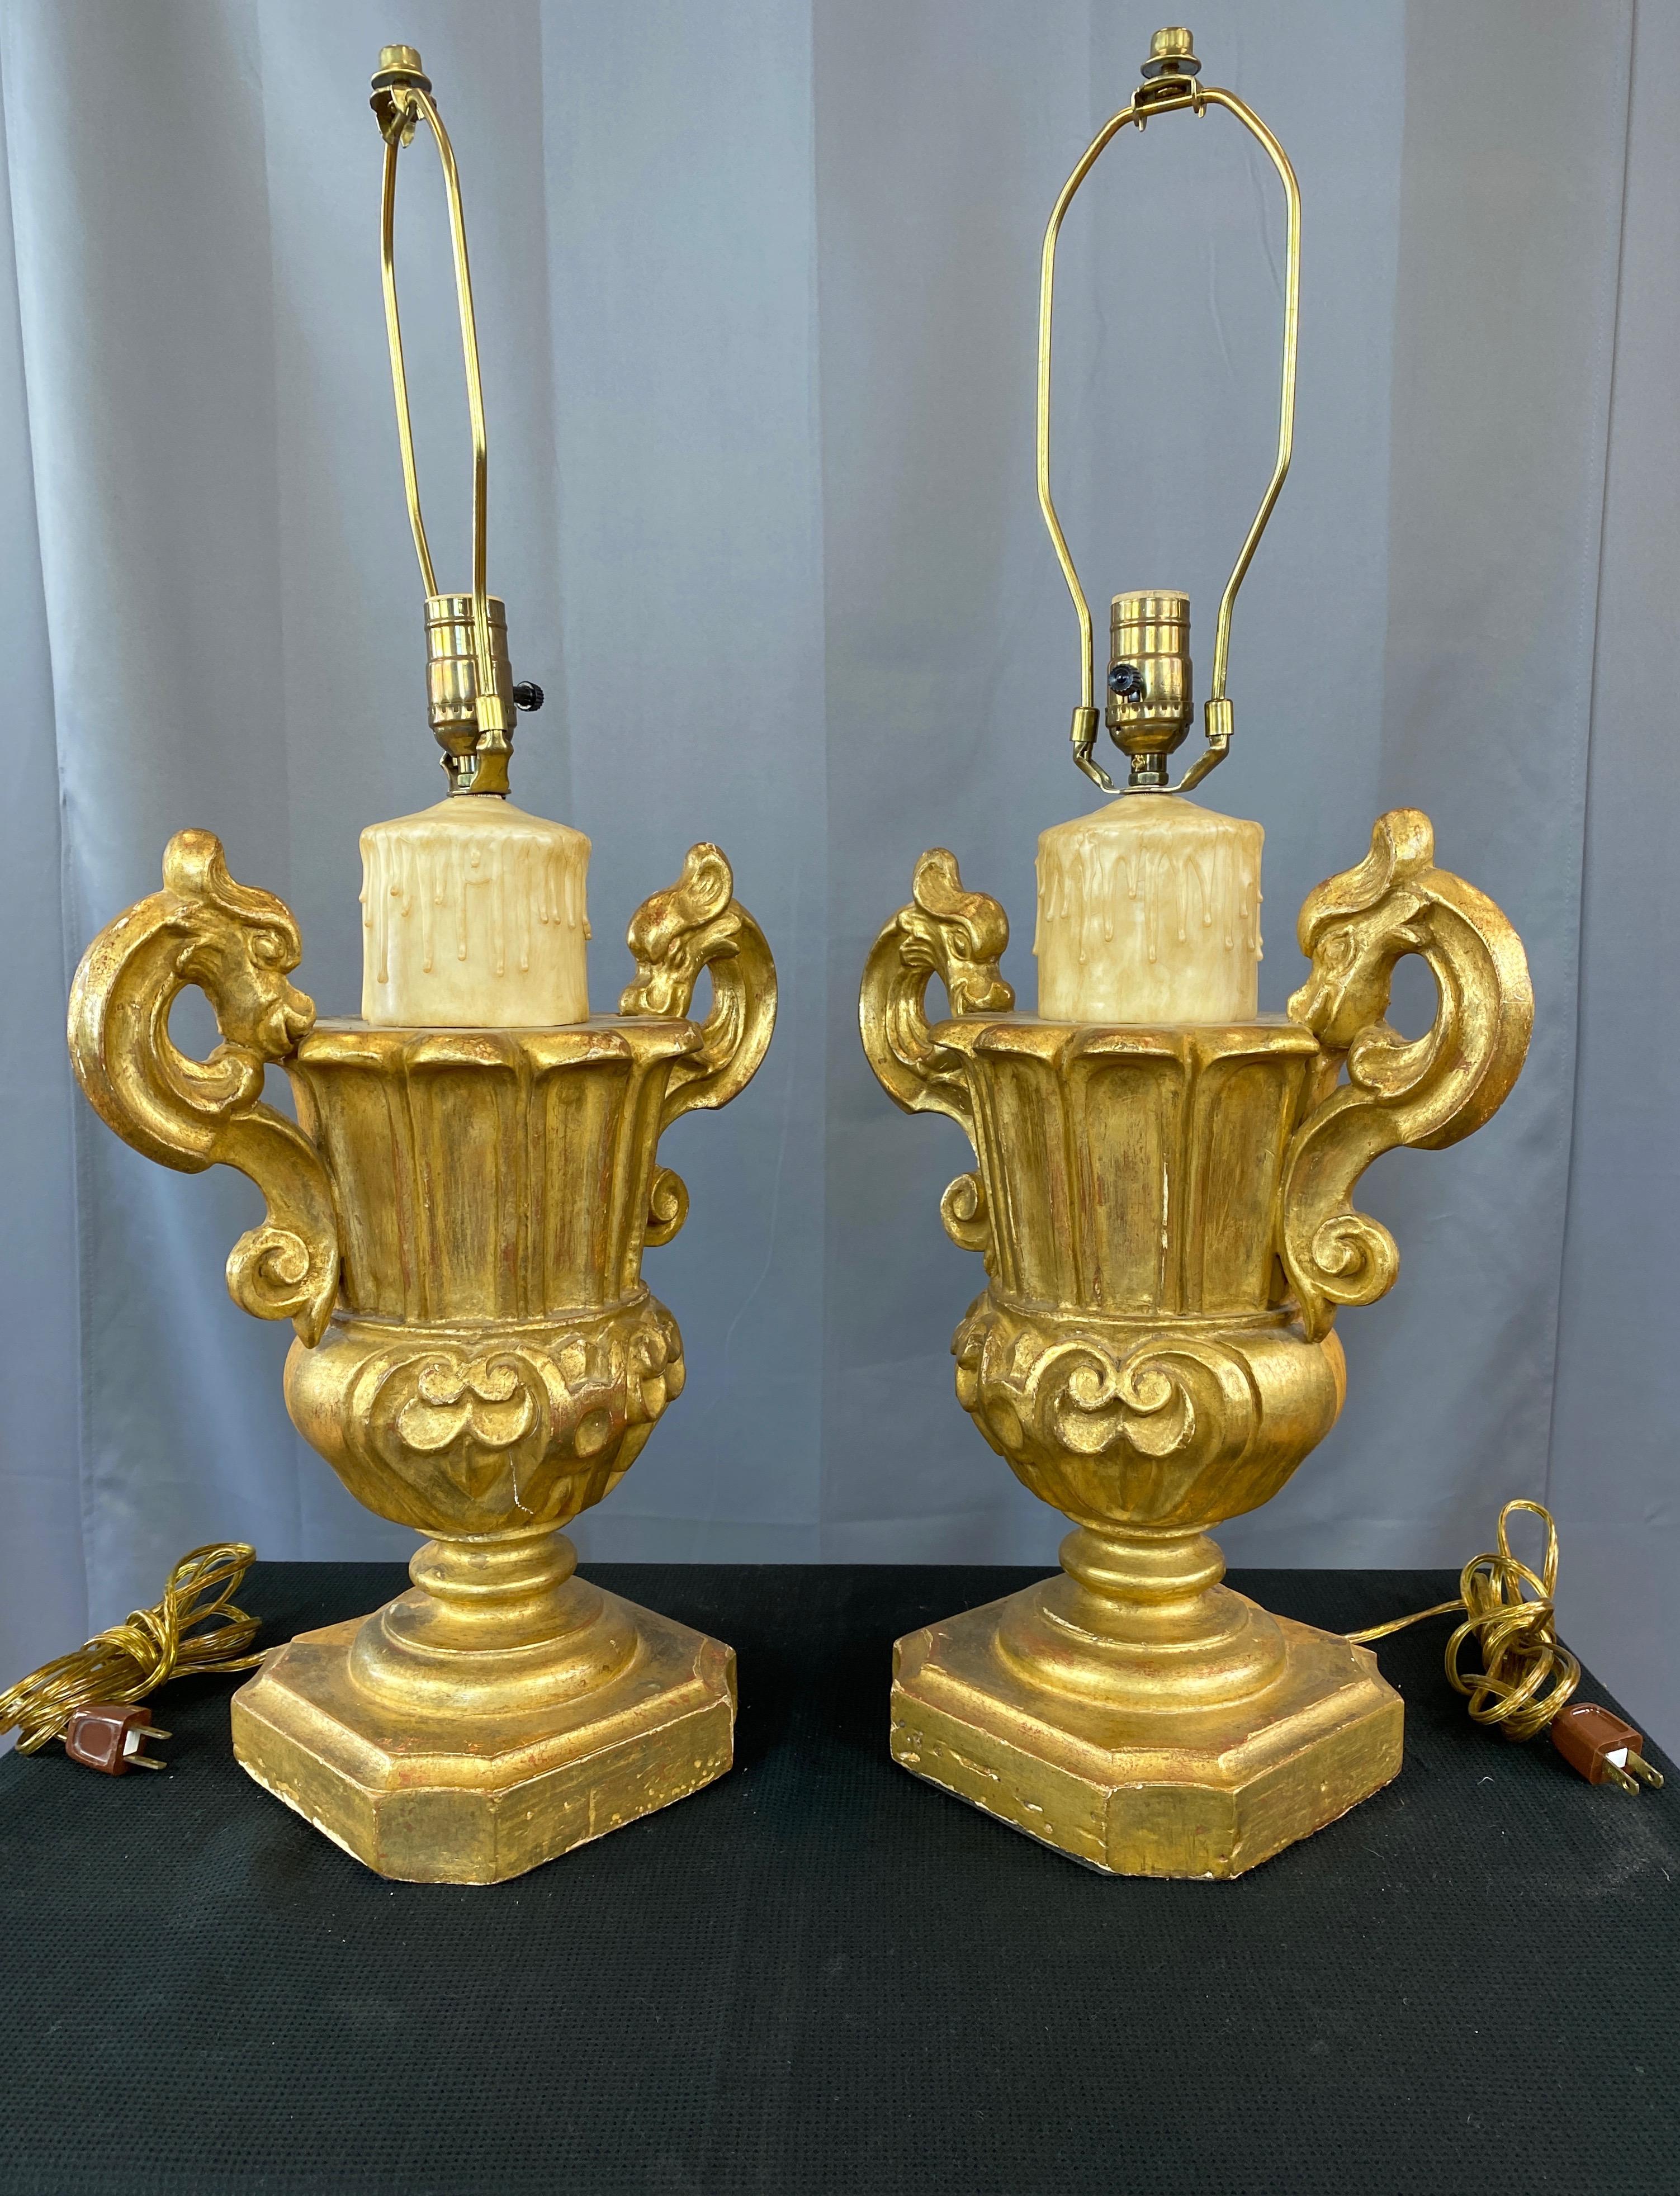 Pair of Italian Baroque Revival Giltwood Urn and Faux Candle Table Lamps, 1930s In Good Condition For Sale In San Francisco, CA